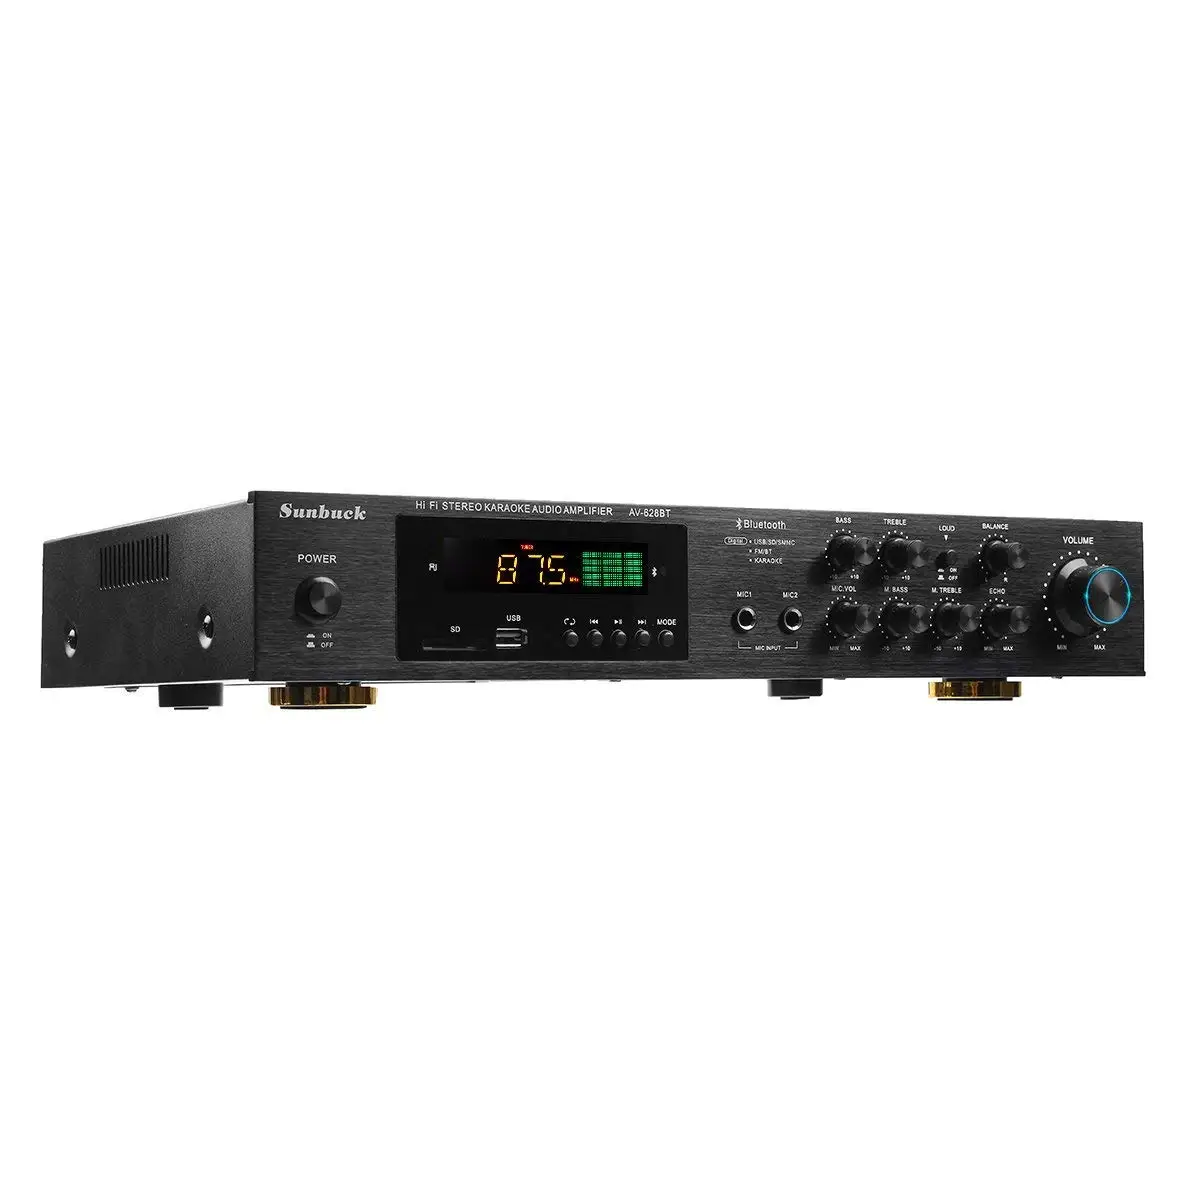 best 4 channel amp for sound quality